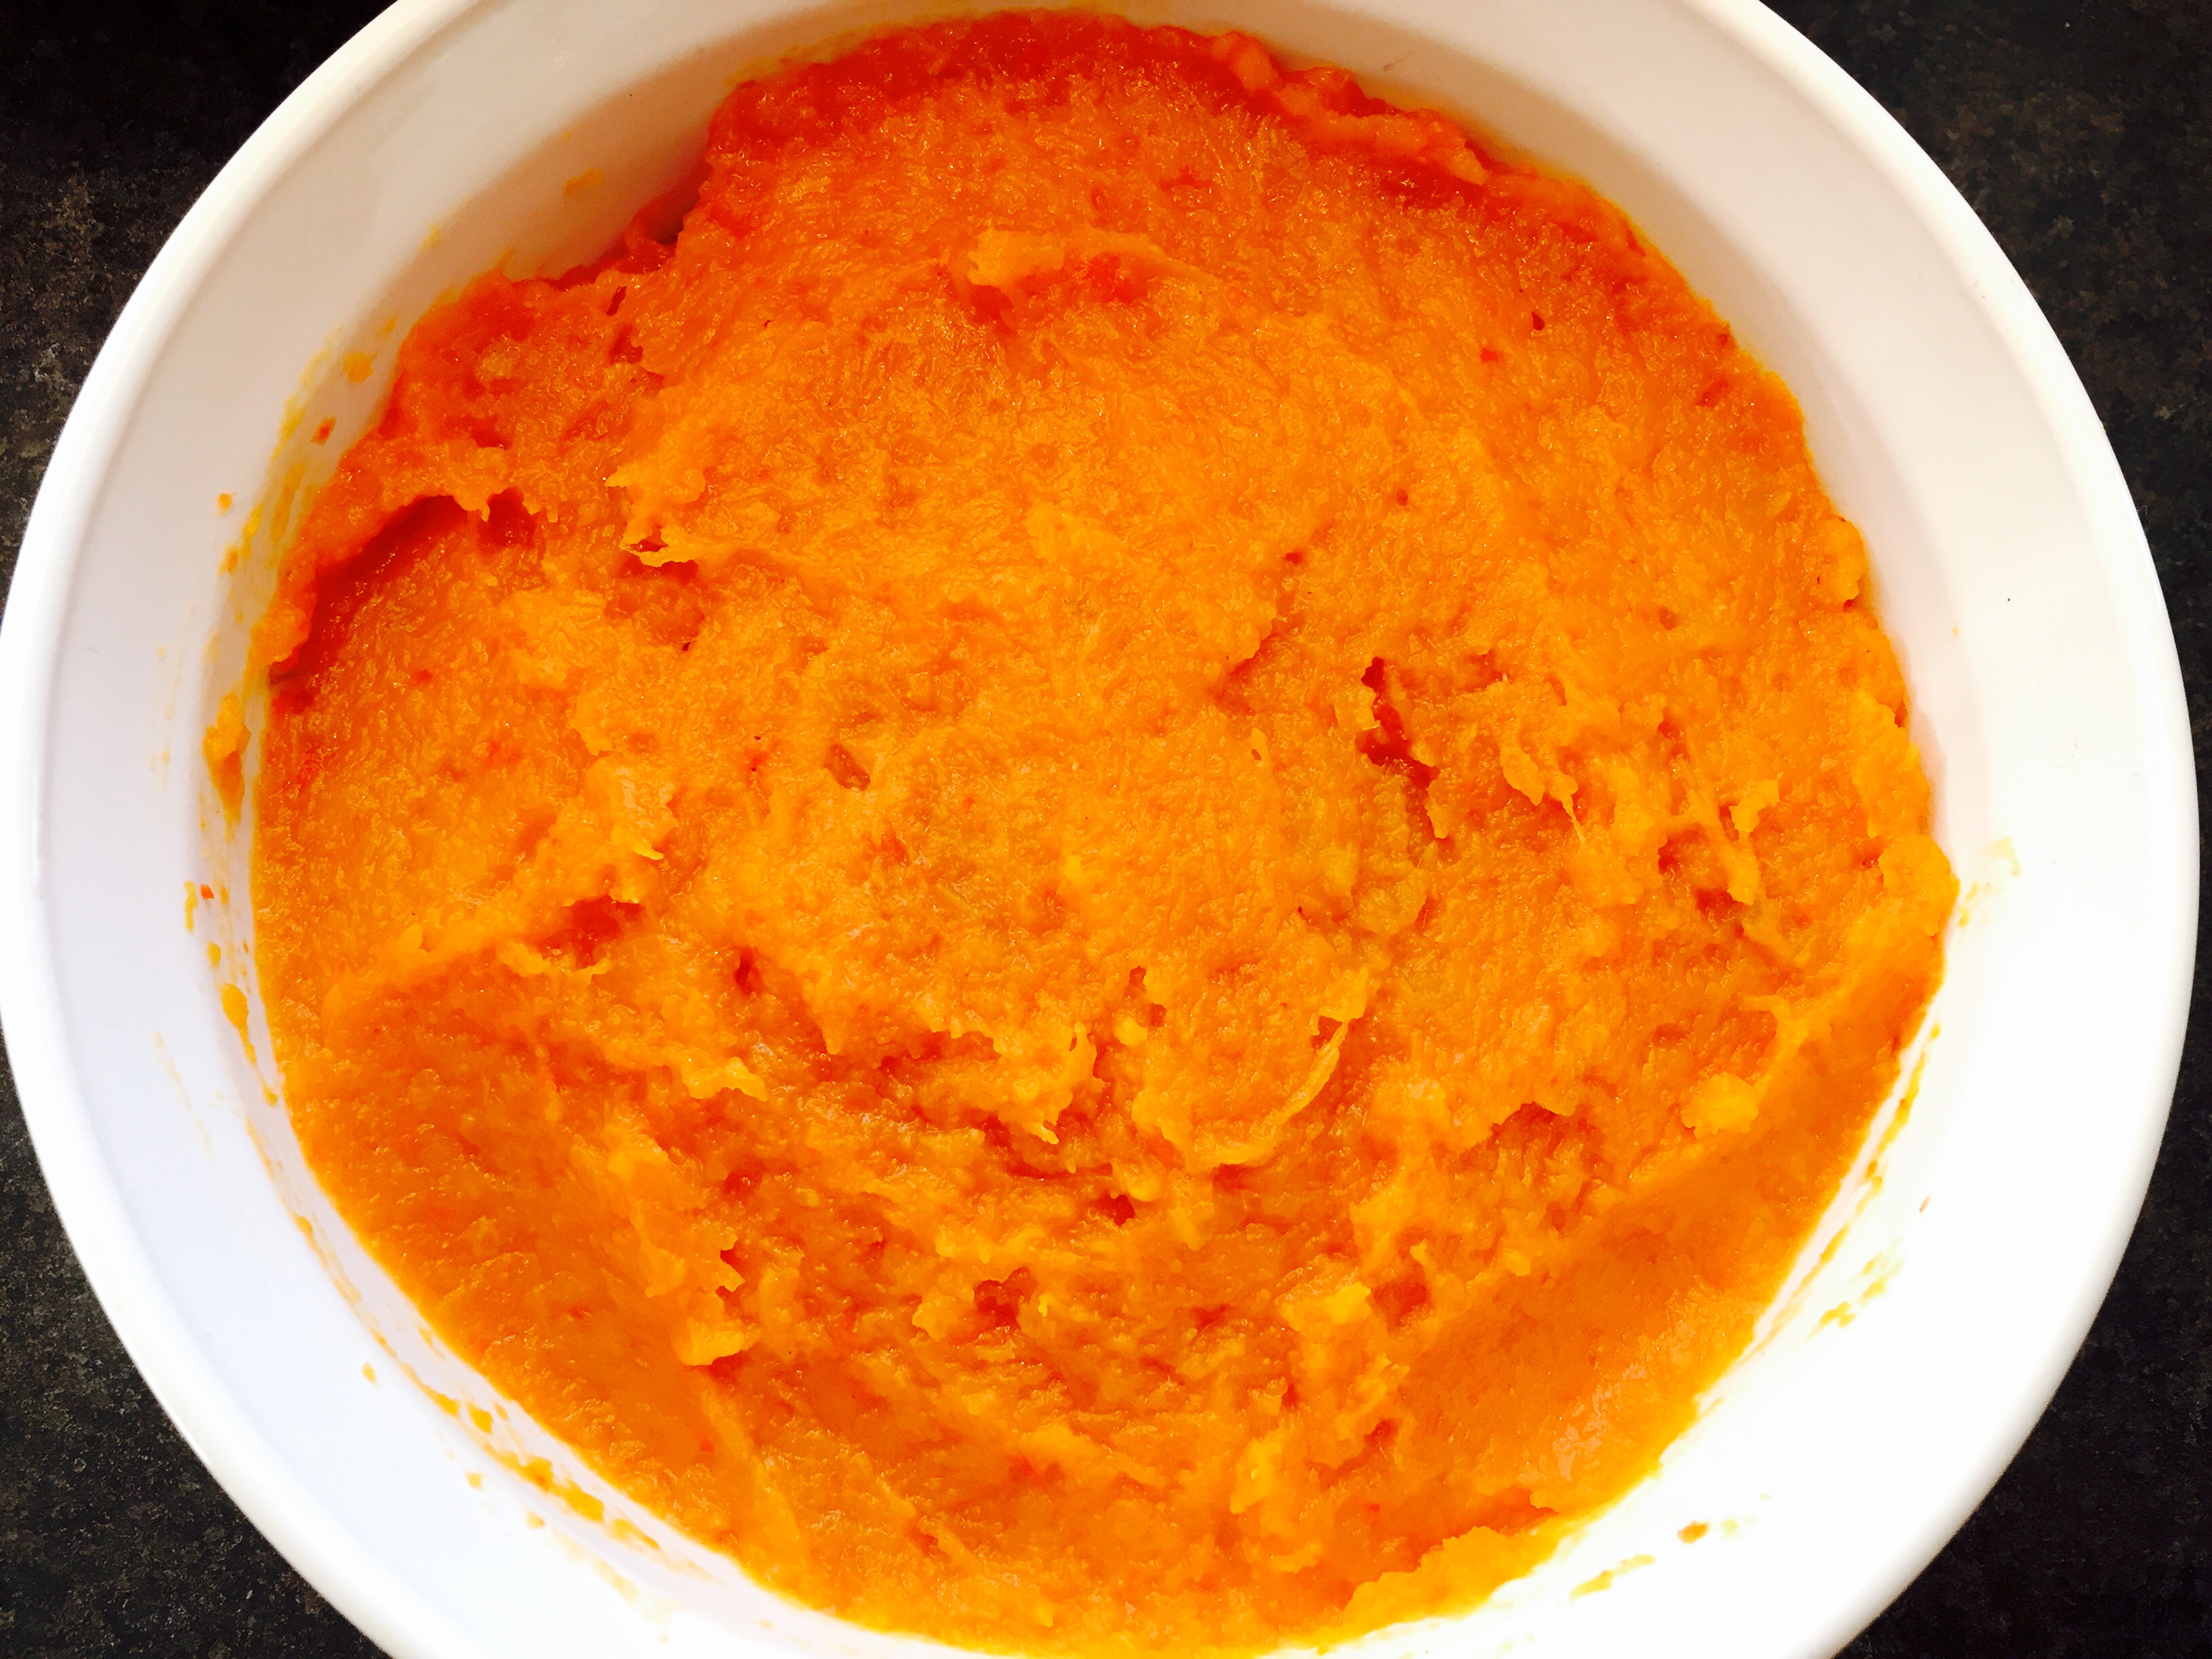 One of the most delicious side dishes ever, roasted butternut squash and roasted sweet peppers mashed together in a beautiful culinary combo